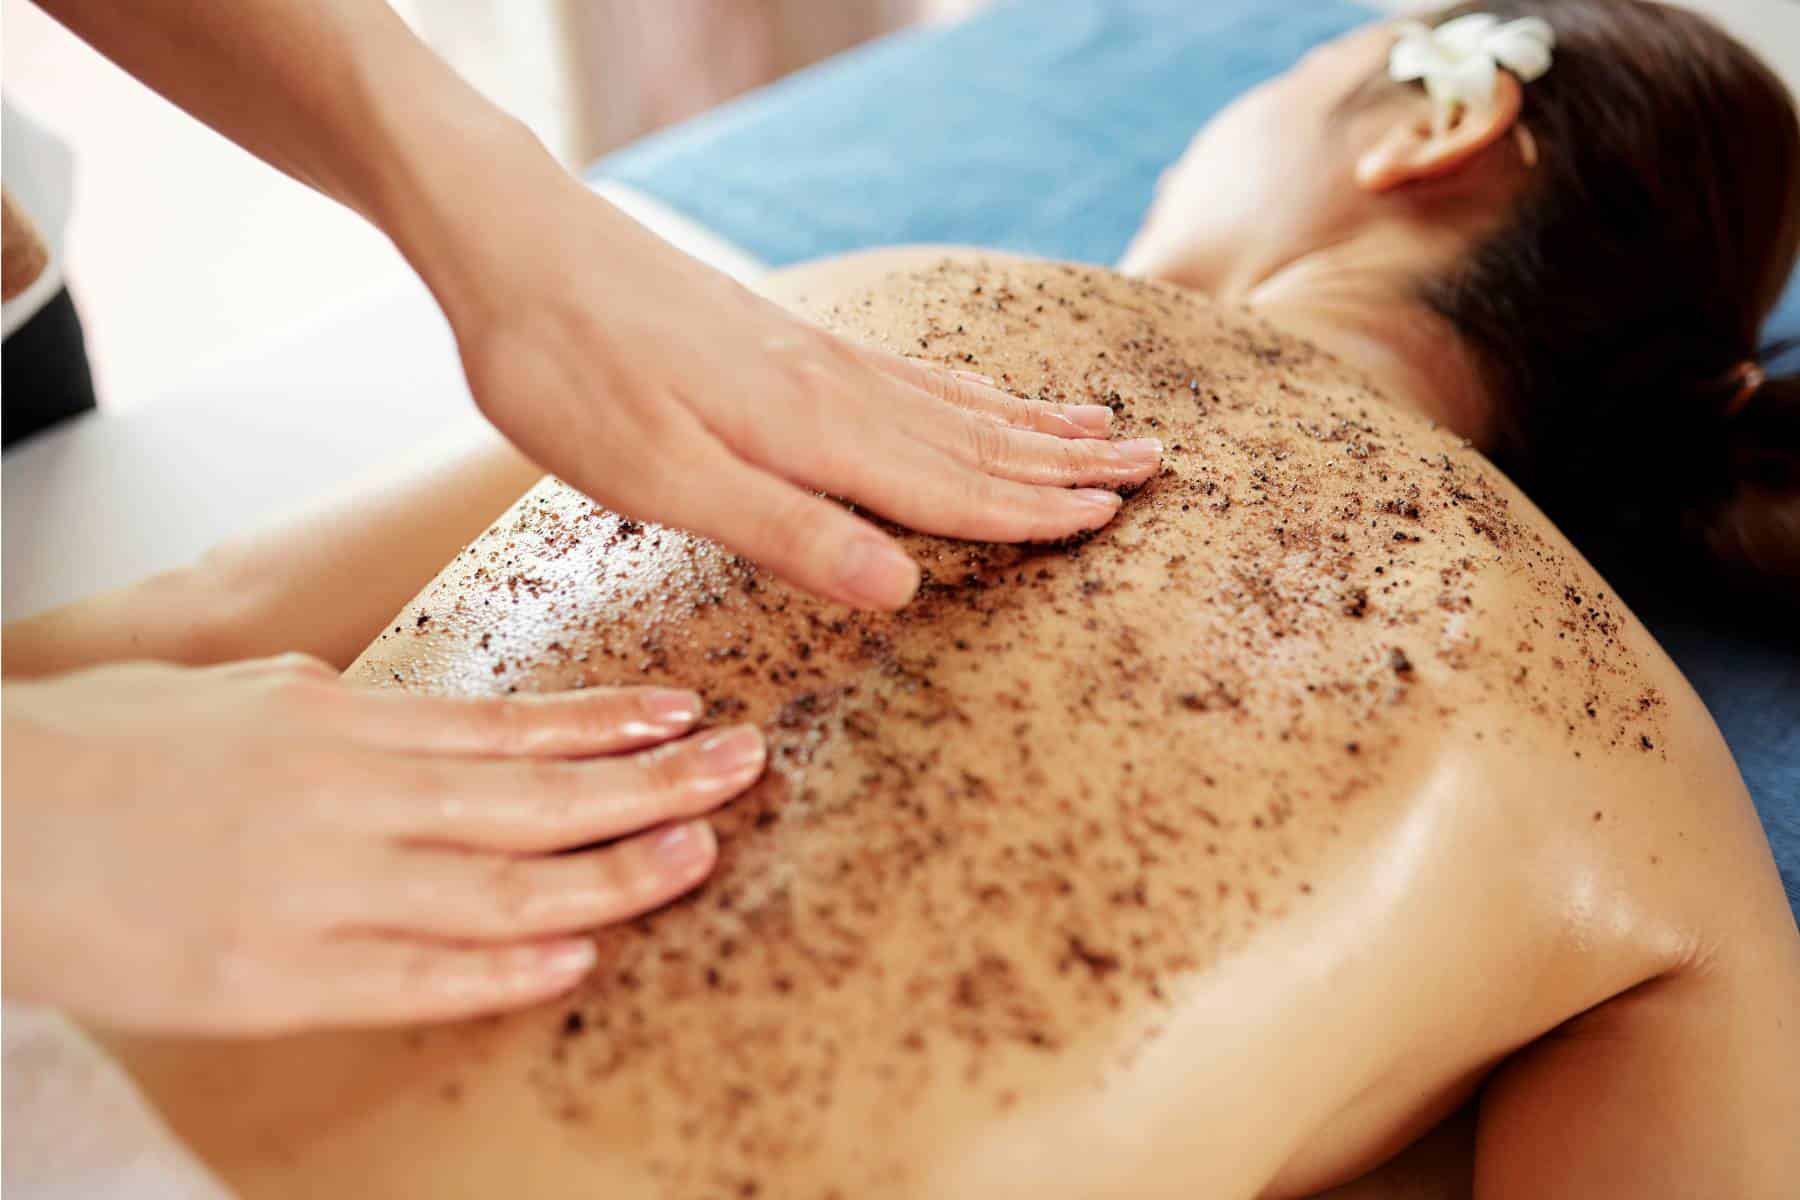 woman receiving a body scrub treatment on her back at a spa